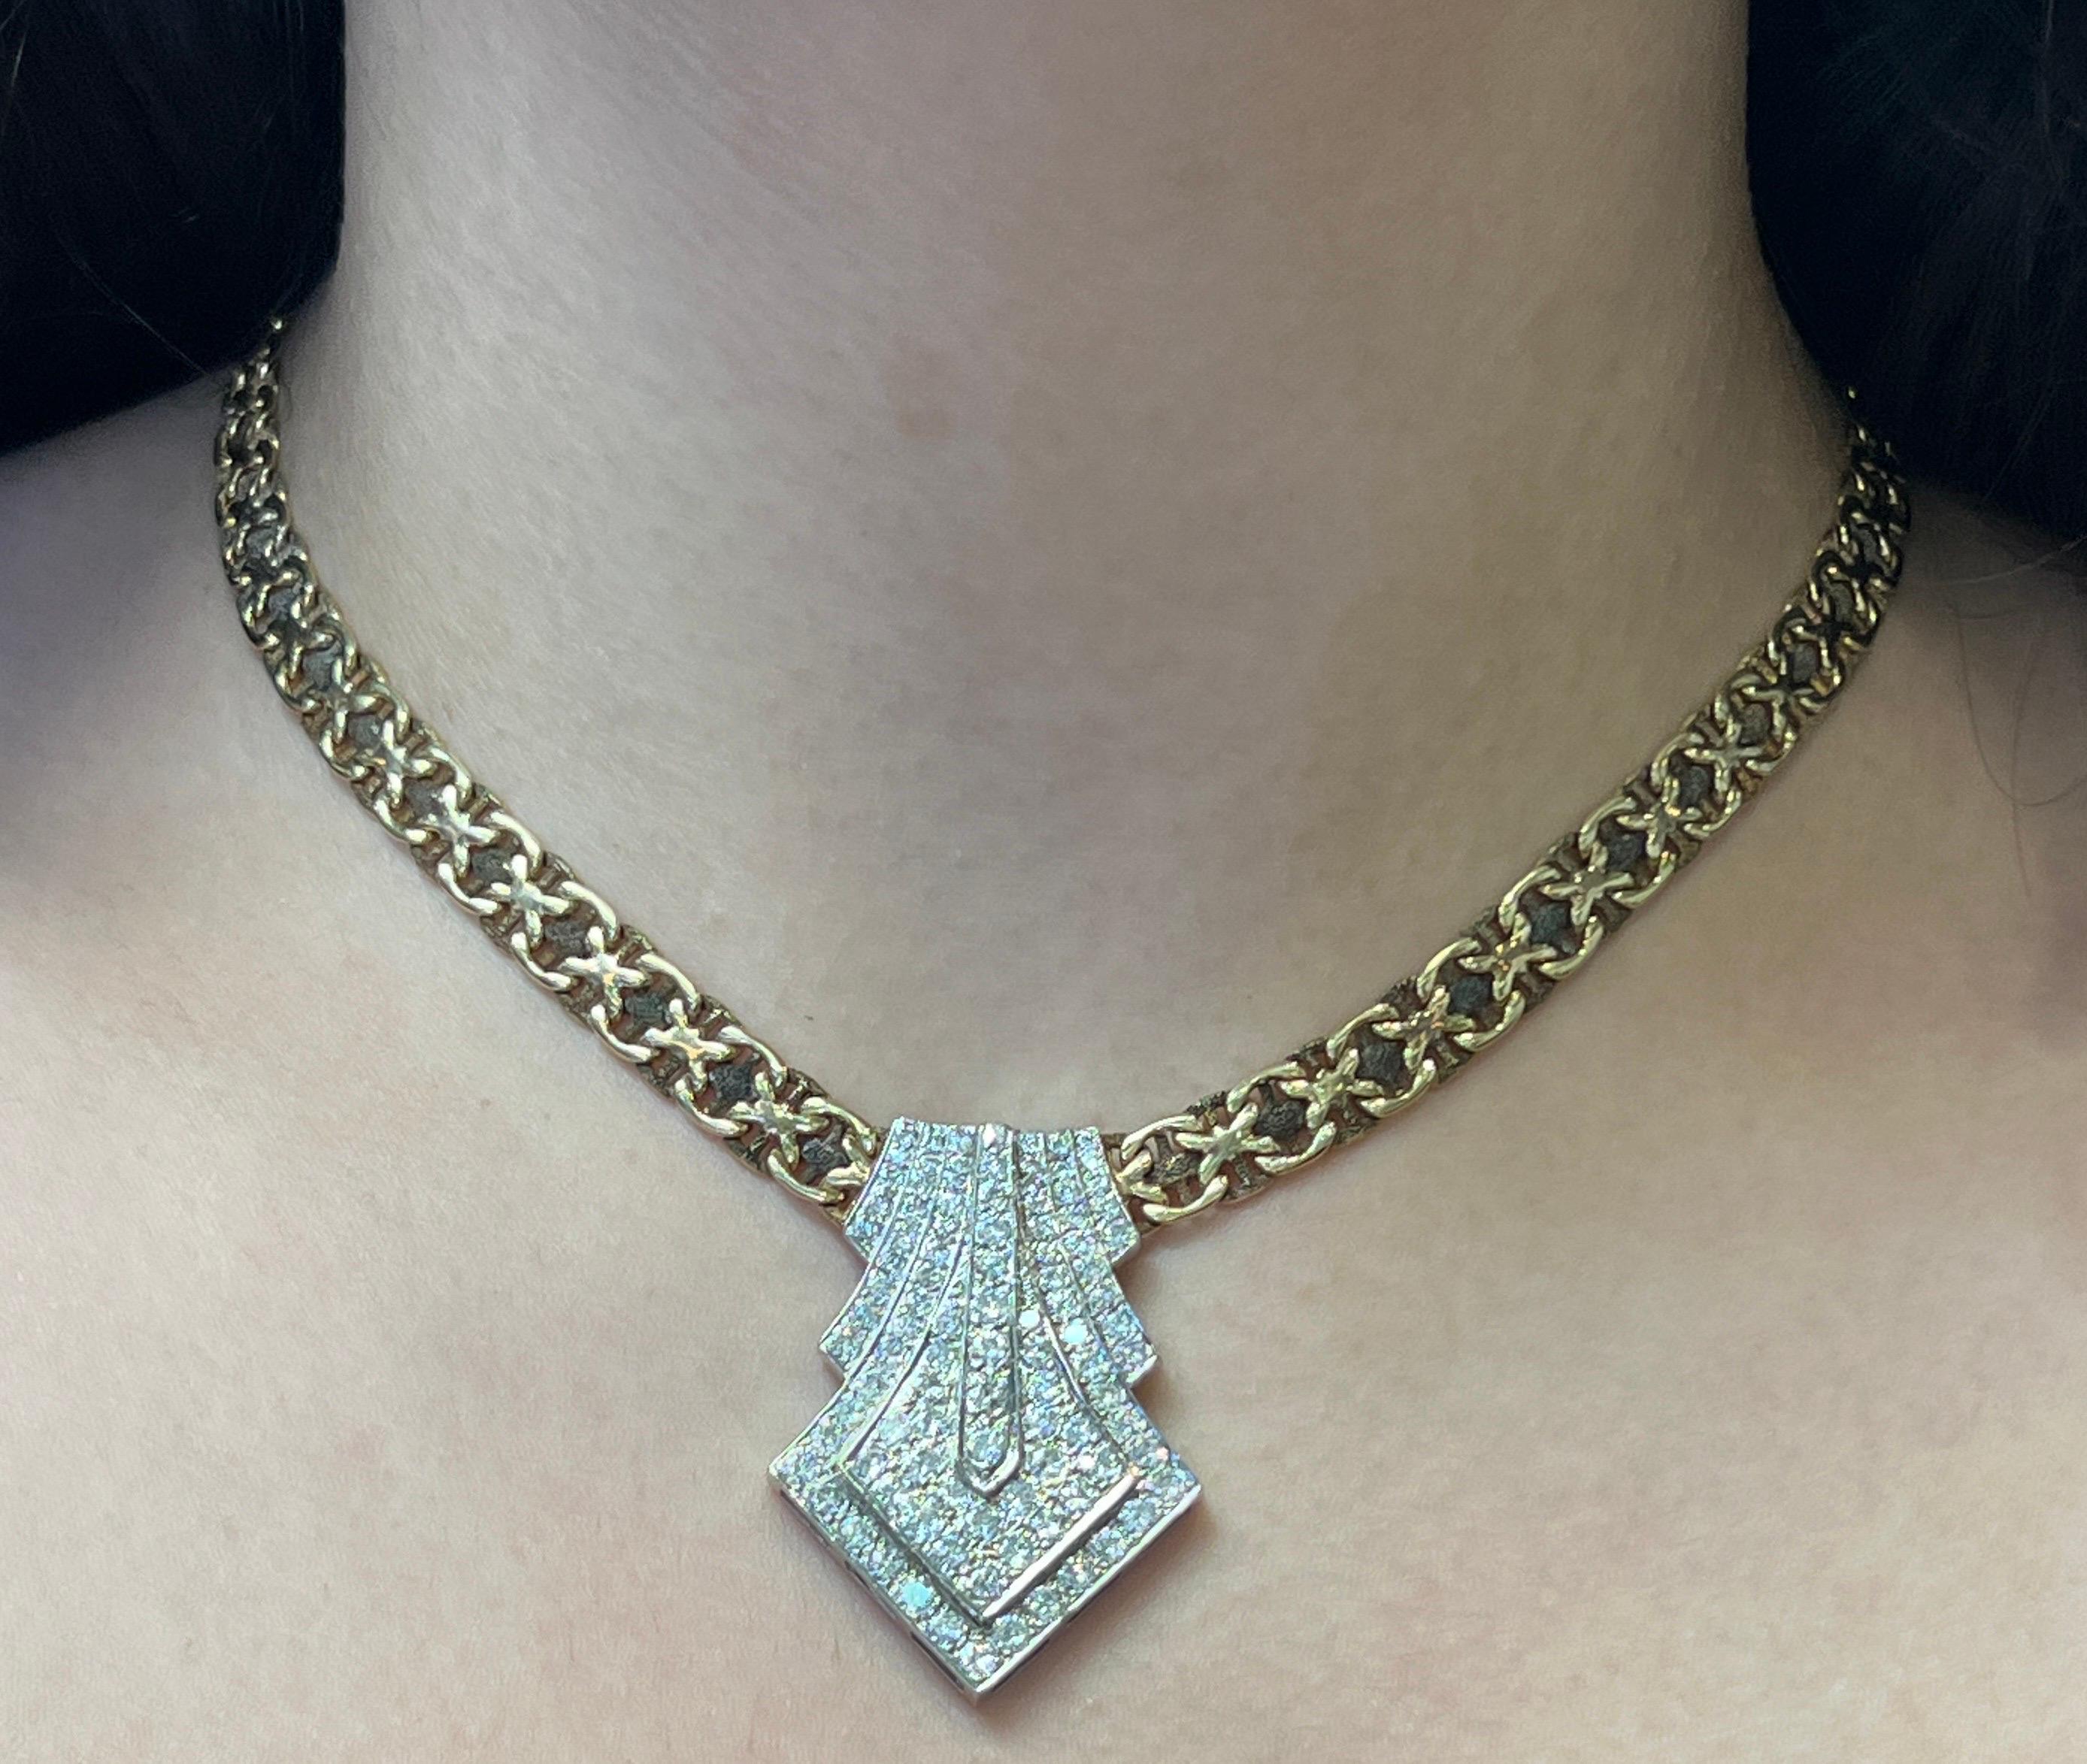 Diamond Pendant Necklace 

A pendant necklace set with 100 round cut diamonds with approximate combined Weight of 4.50 carats

Approximate Length: 17 inches
Approximate Weight: 44 grams
Metal type: 14 karat gold
